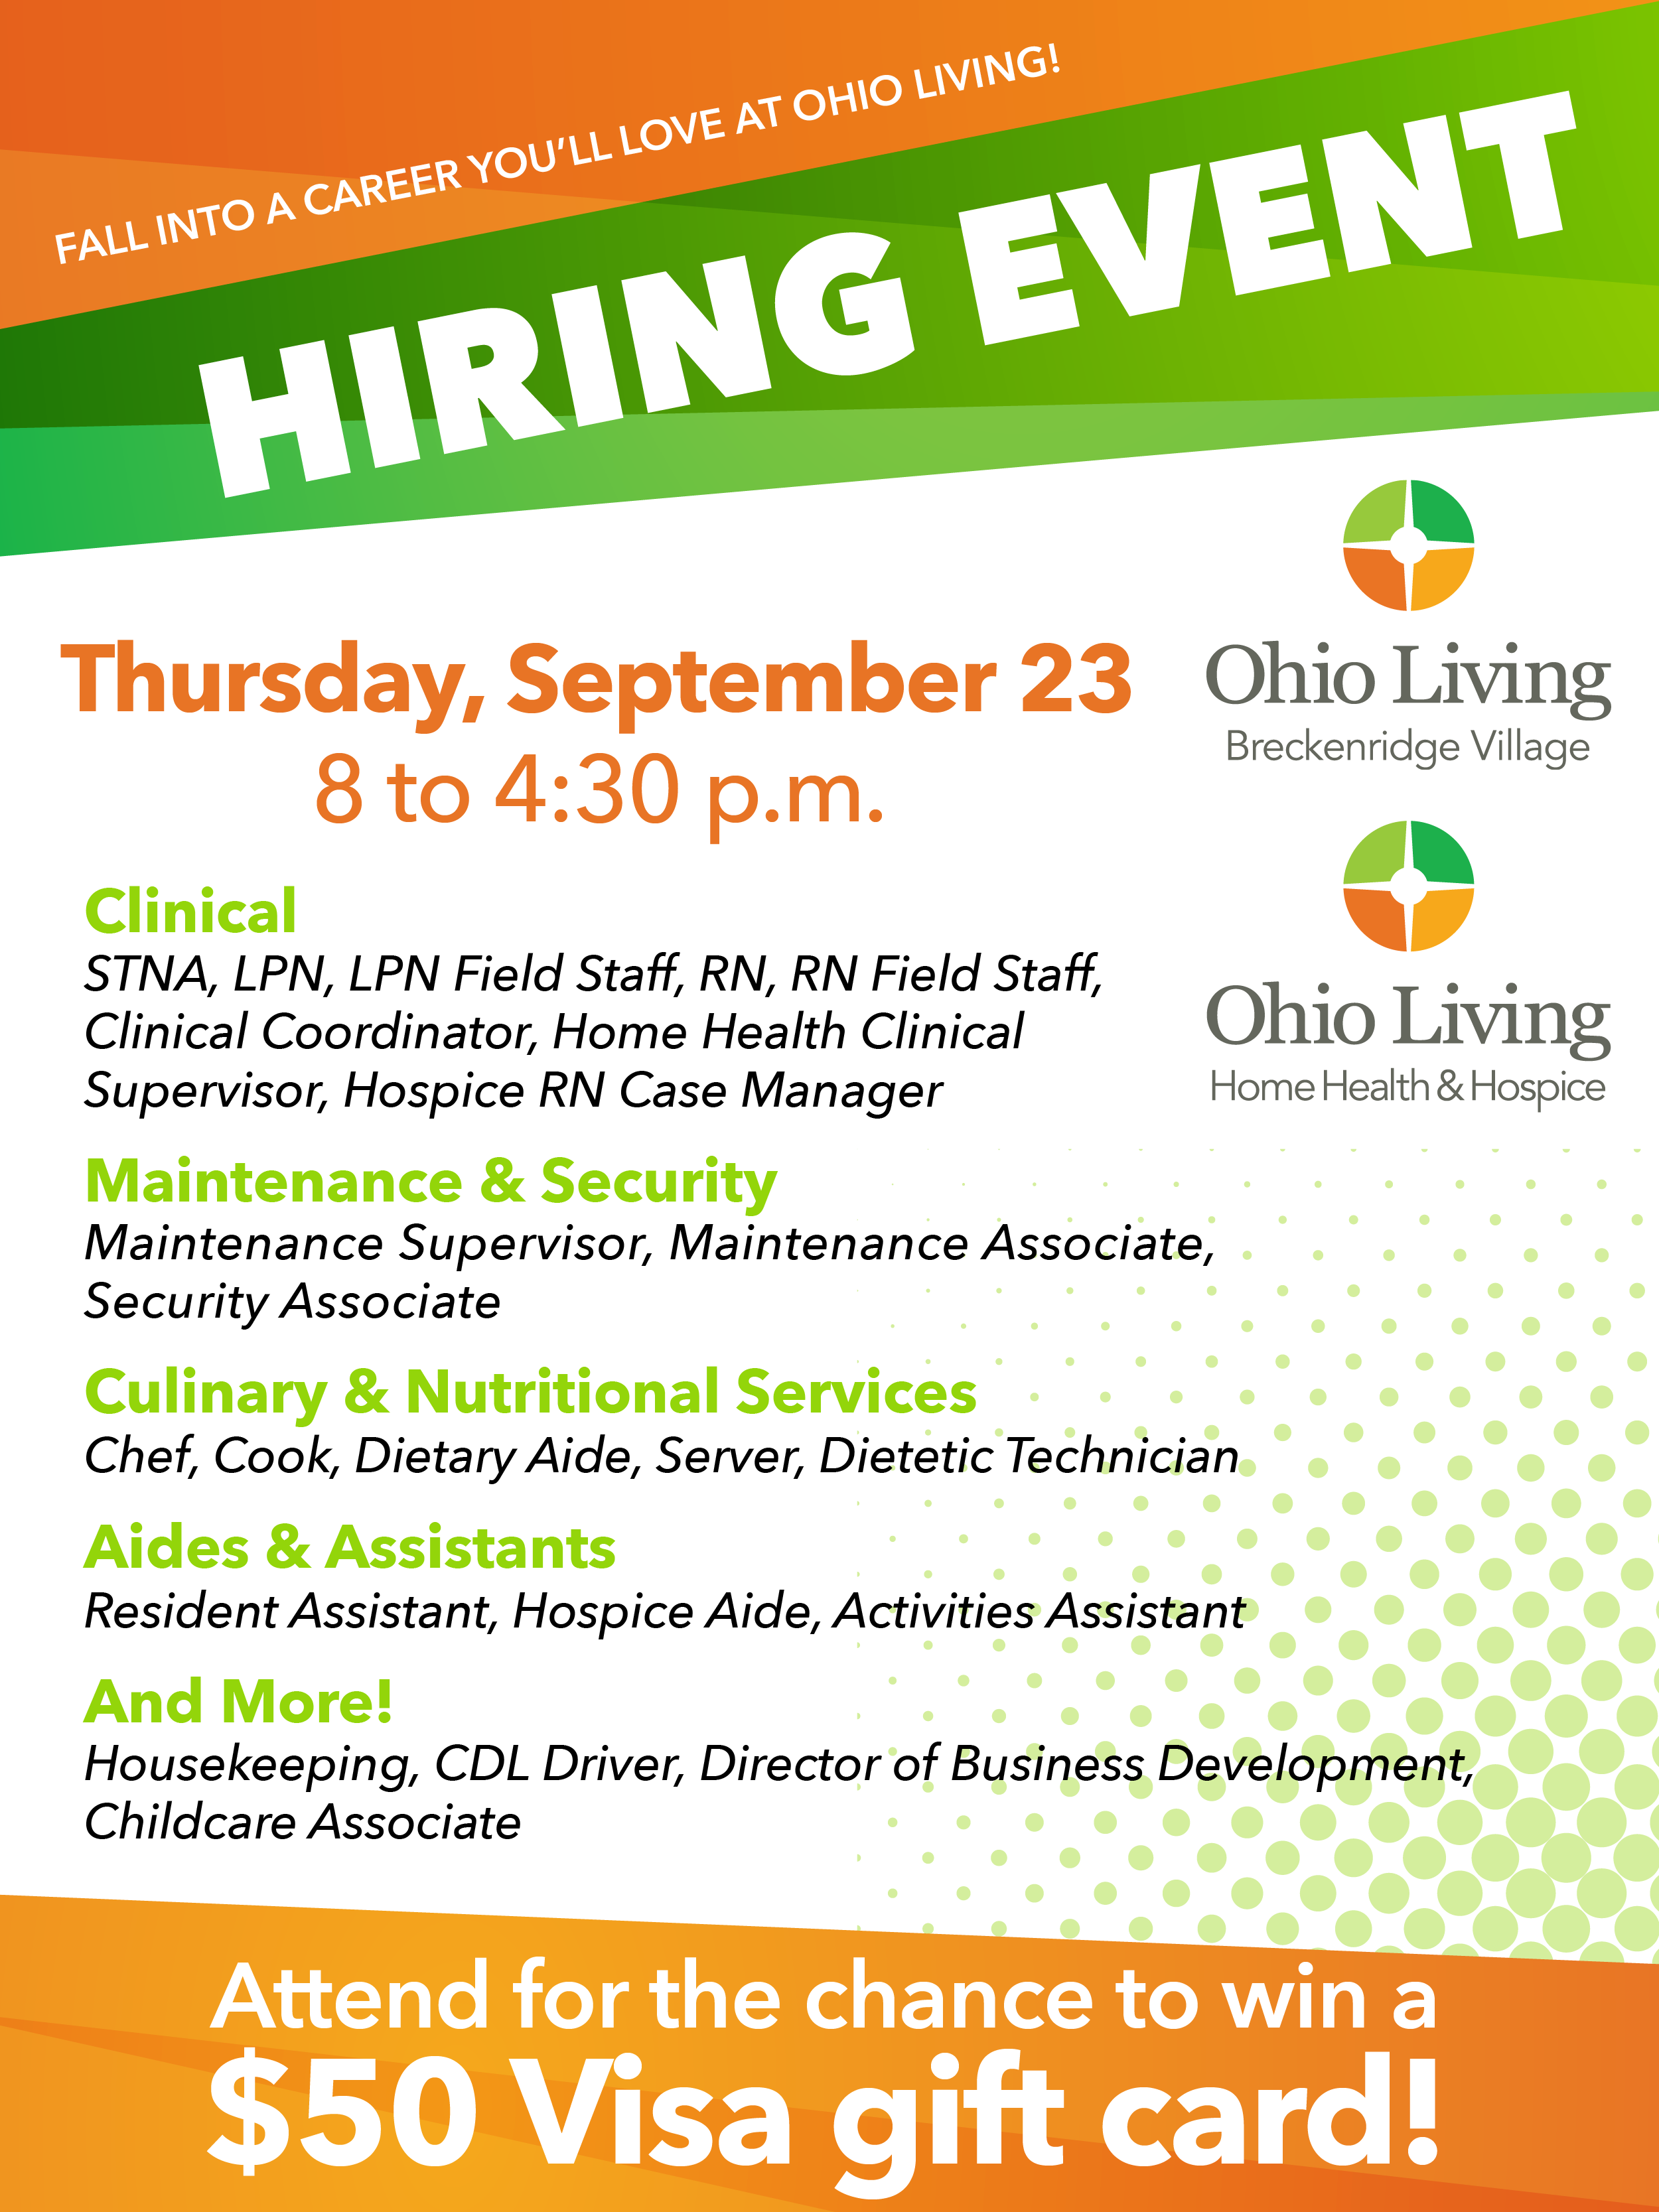 OLBV and GCL Hiring Event 9.23.21 Landing Page-01-1